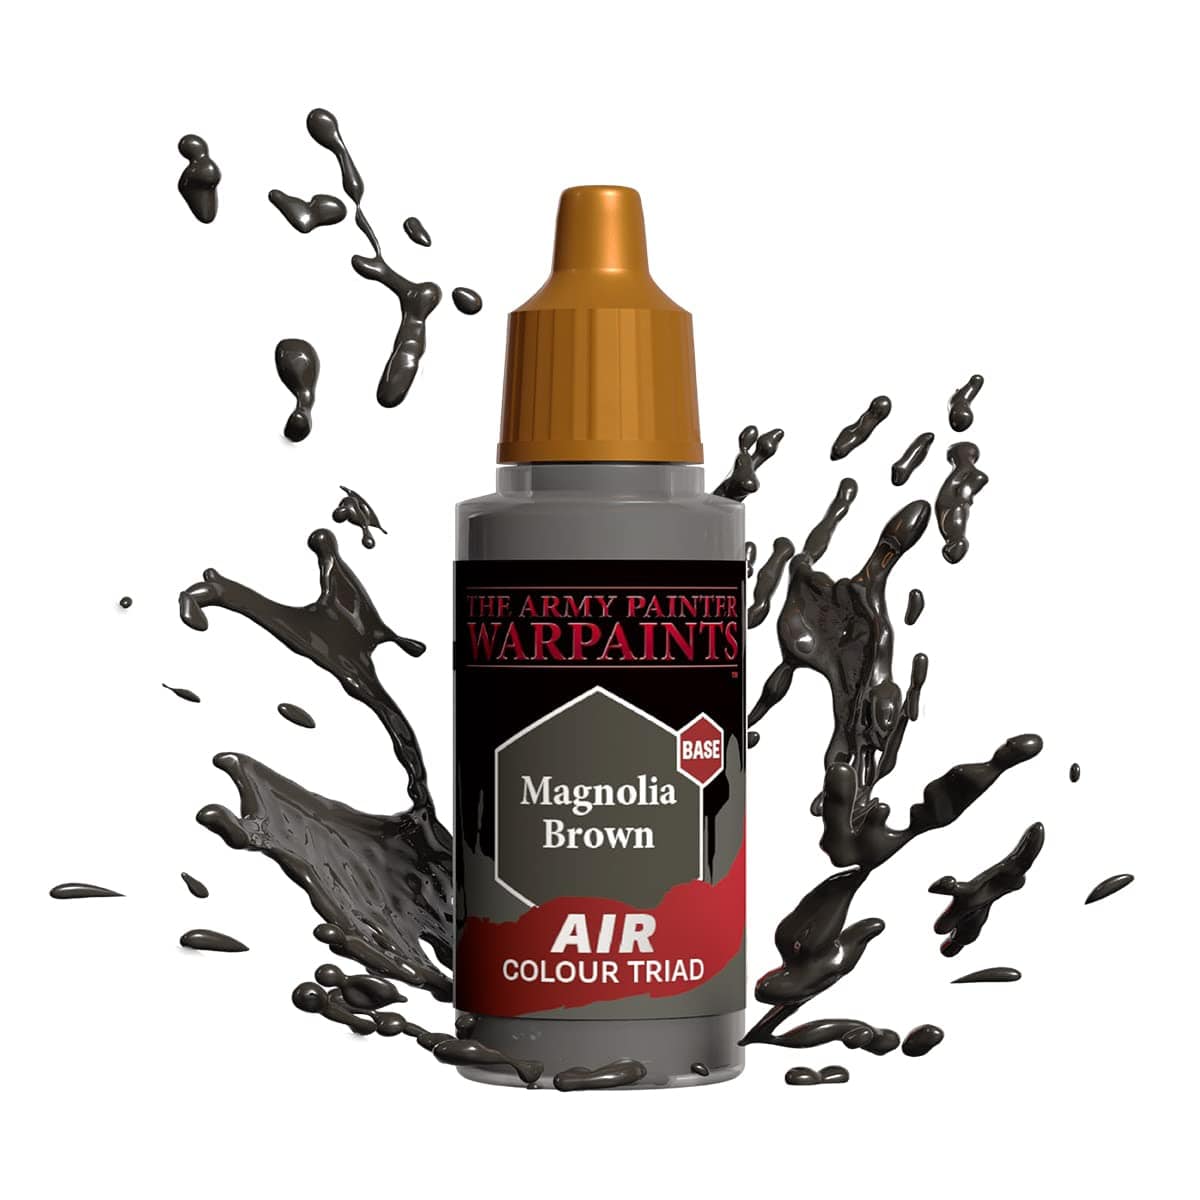 The Army Painter Accessories The Army Painter Warpaints Air: Magnolia Brown 18ml